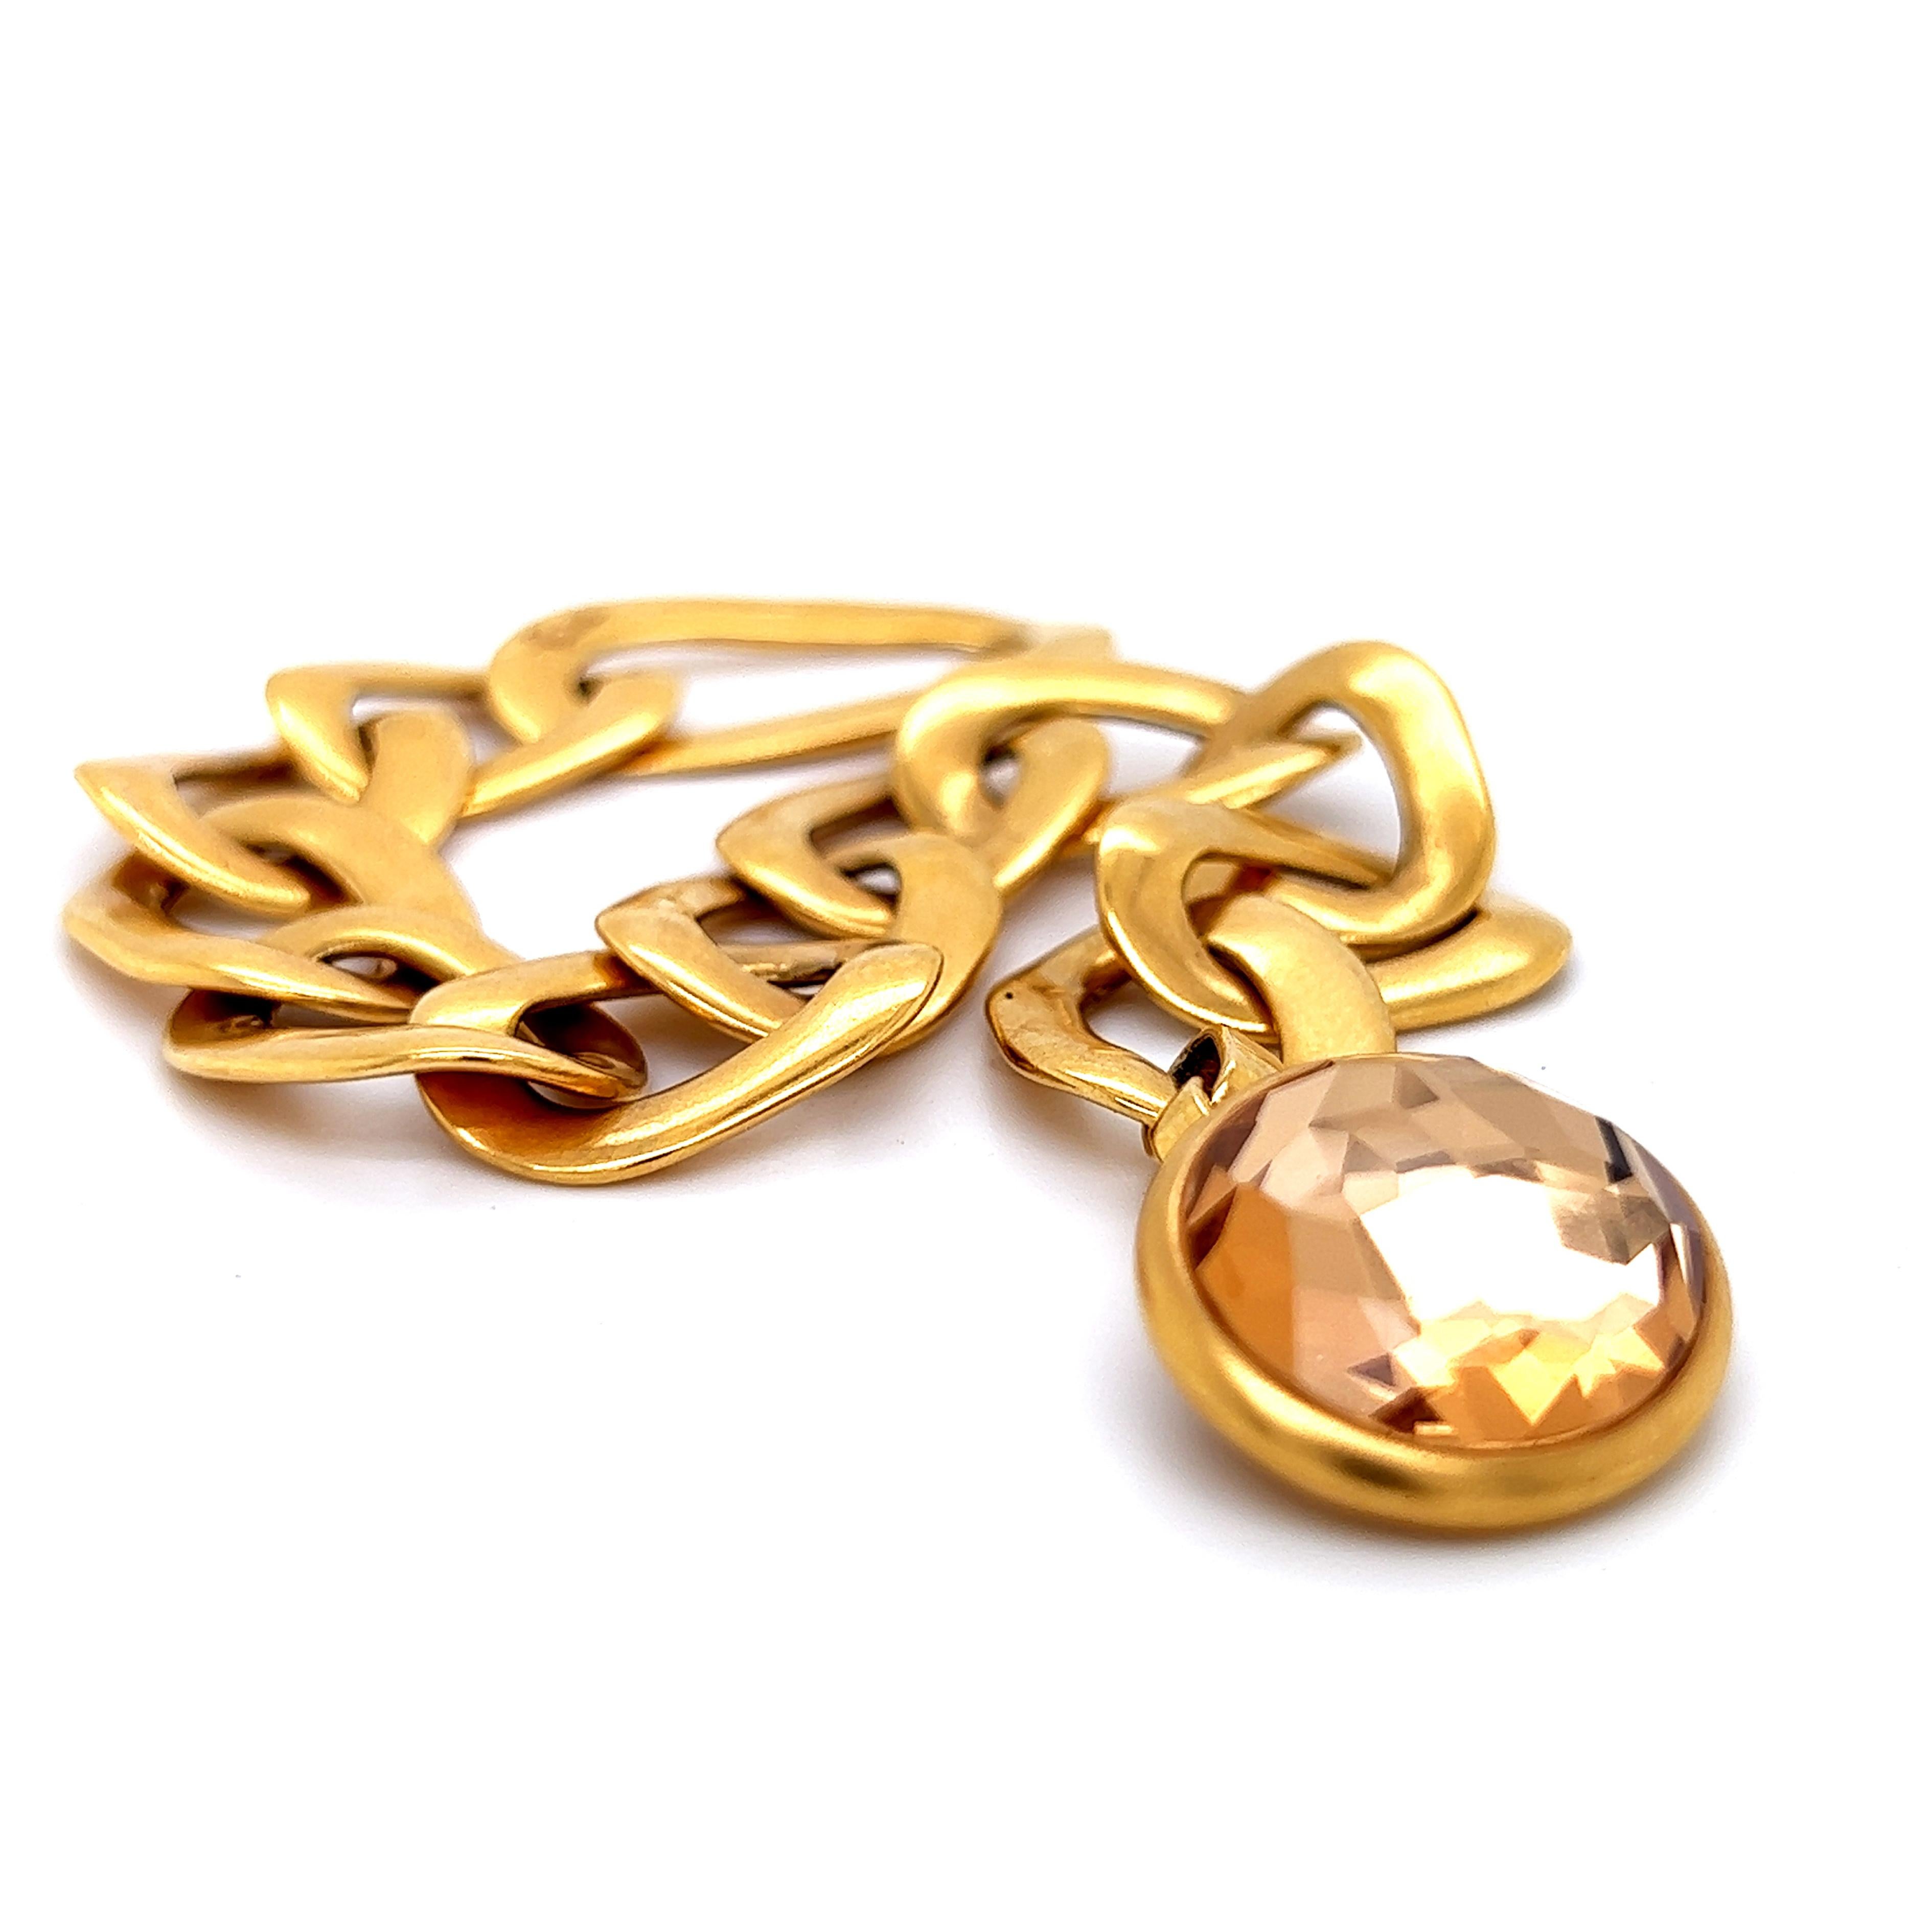 One-of-a-kind, Extra-ordinary, Original 2010 Chic and absolutely Timeless Pomellato Narciso Collection Chain Bracelet, a beautiful example of Italian Craftsman of the period: a Natural Citrine, Special Oval Mirror Cut (from this detail the name